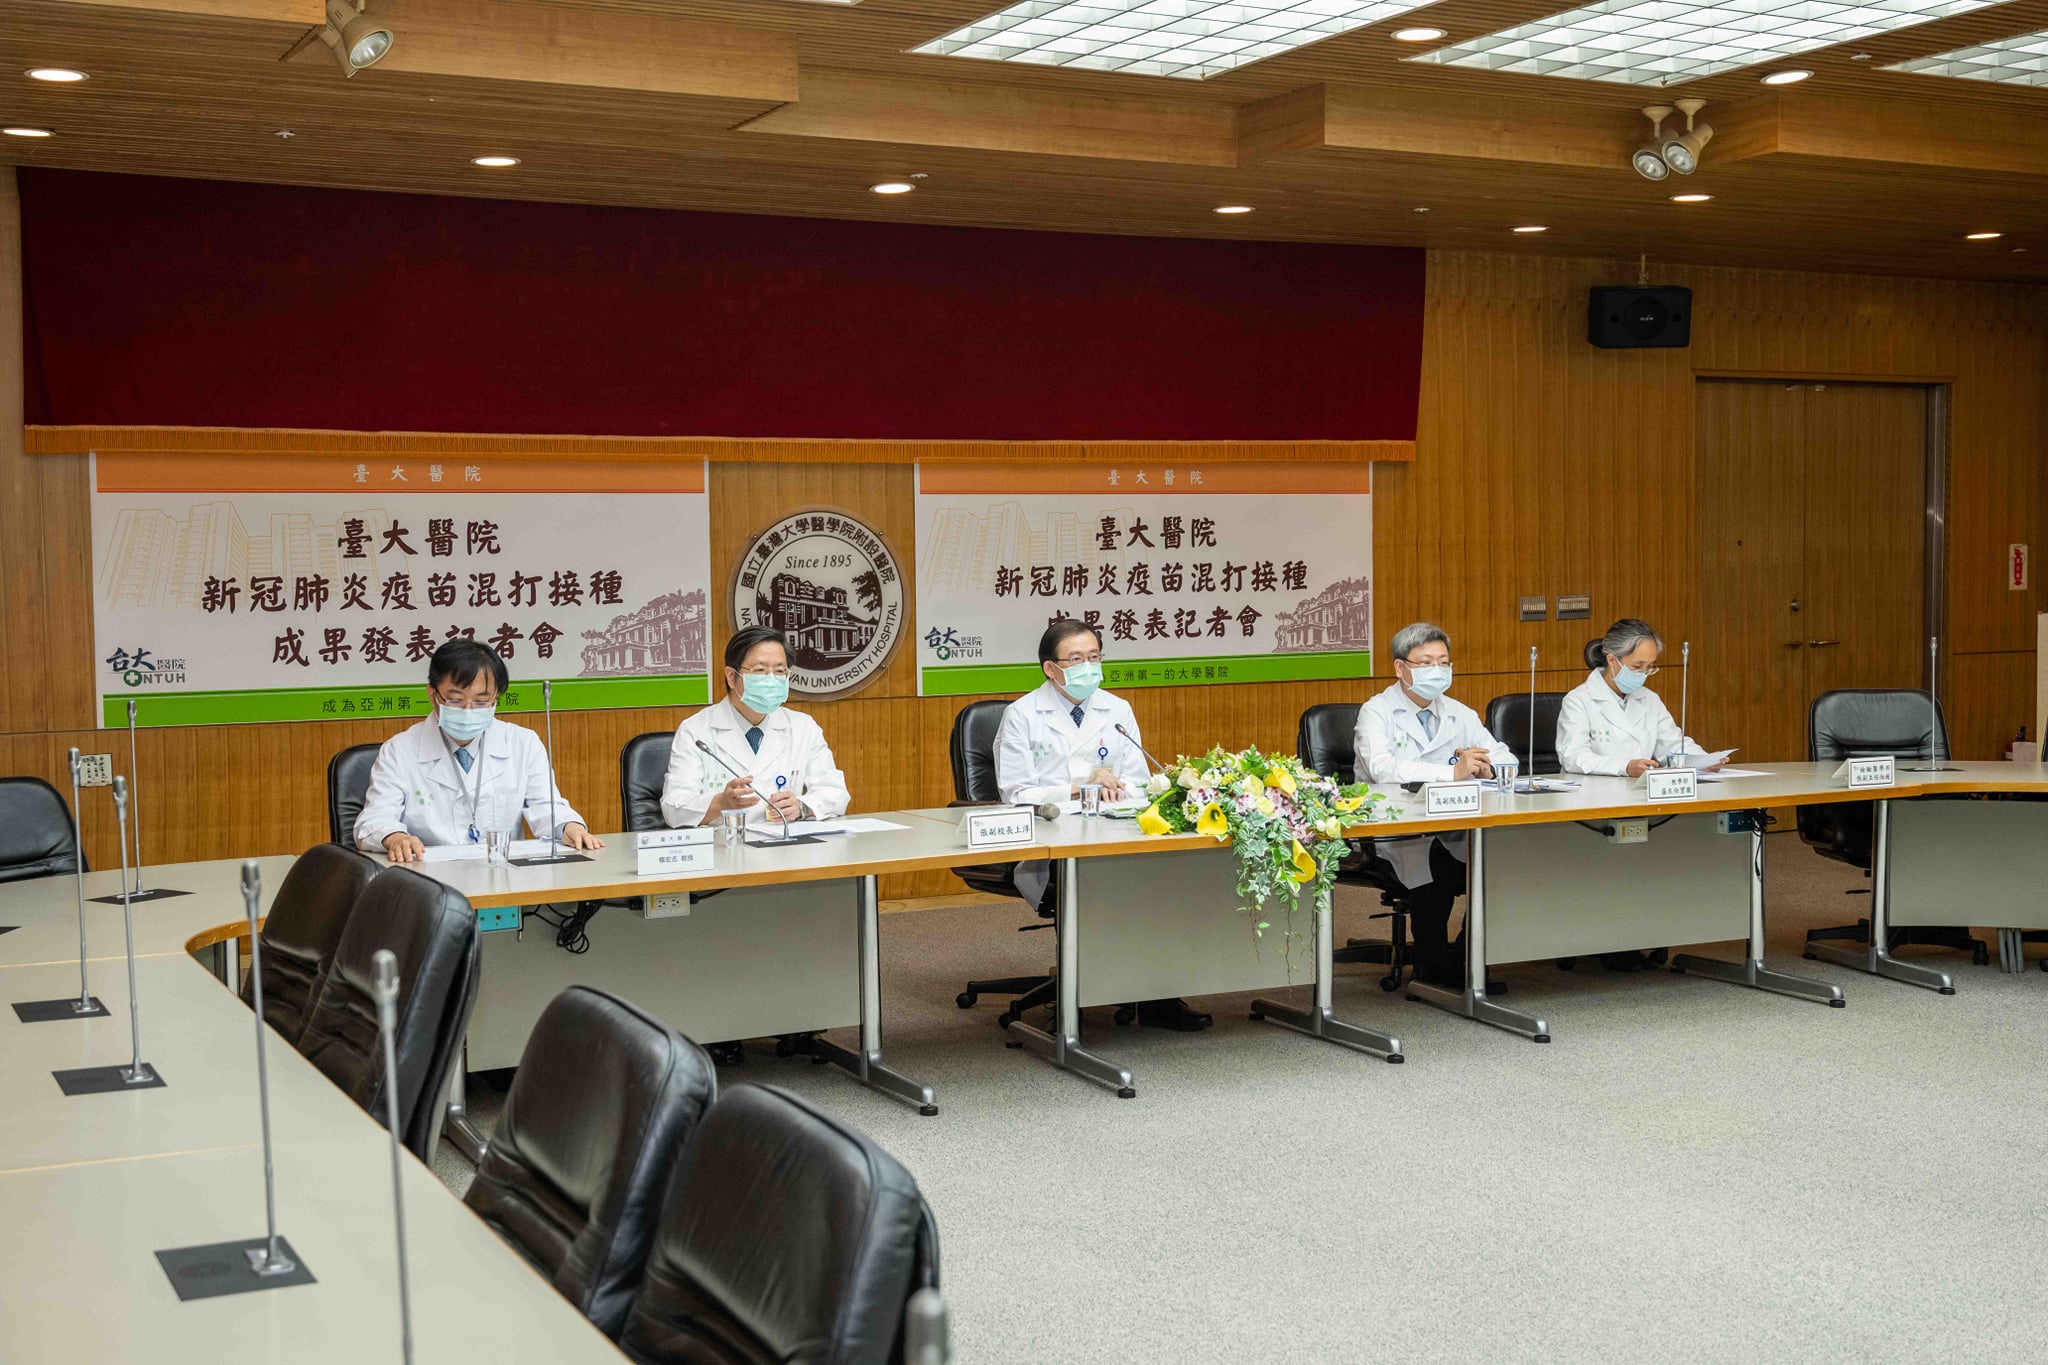 National Taiwan University Hospital held a press conference to show the results of the mix-and-match COVID vaccines. (Photo / Retrieved from the National Taiwan University Hospital)